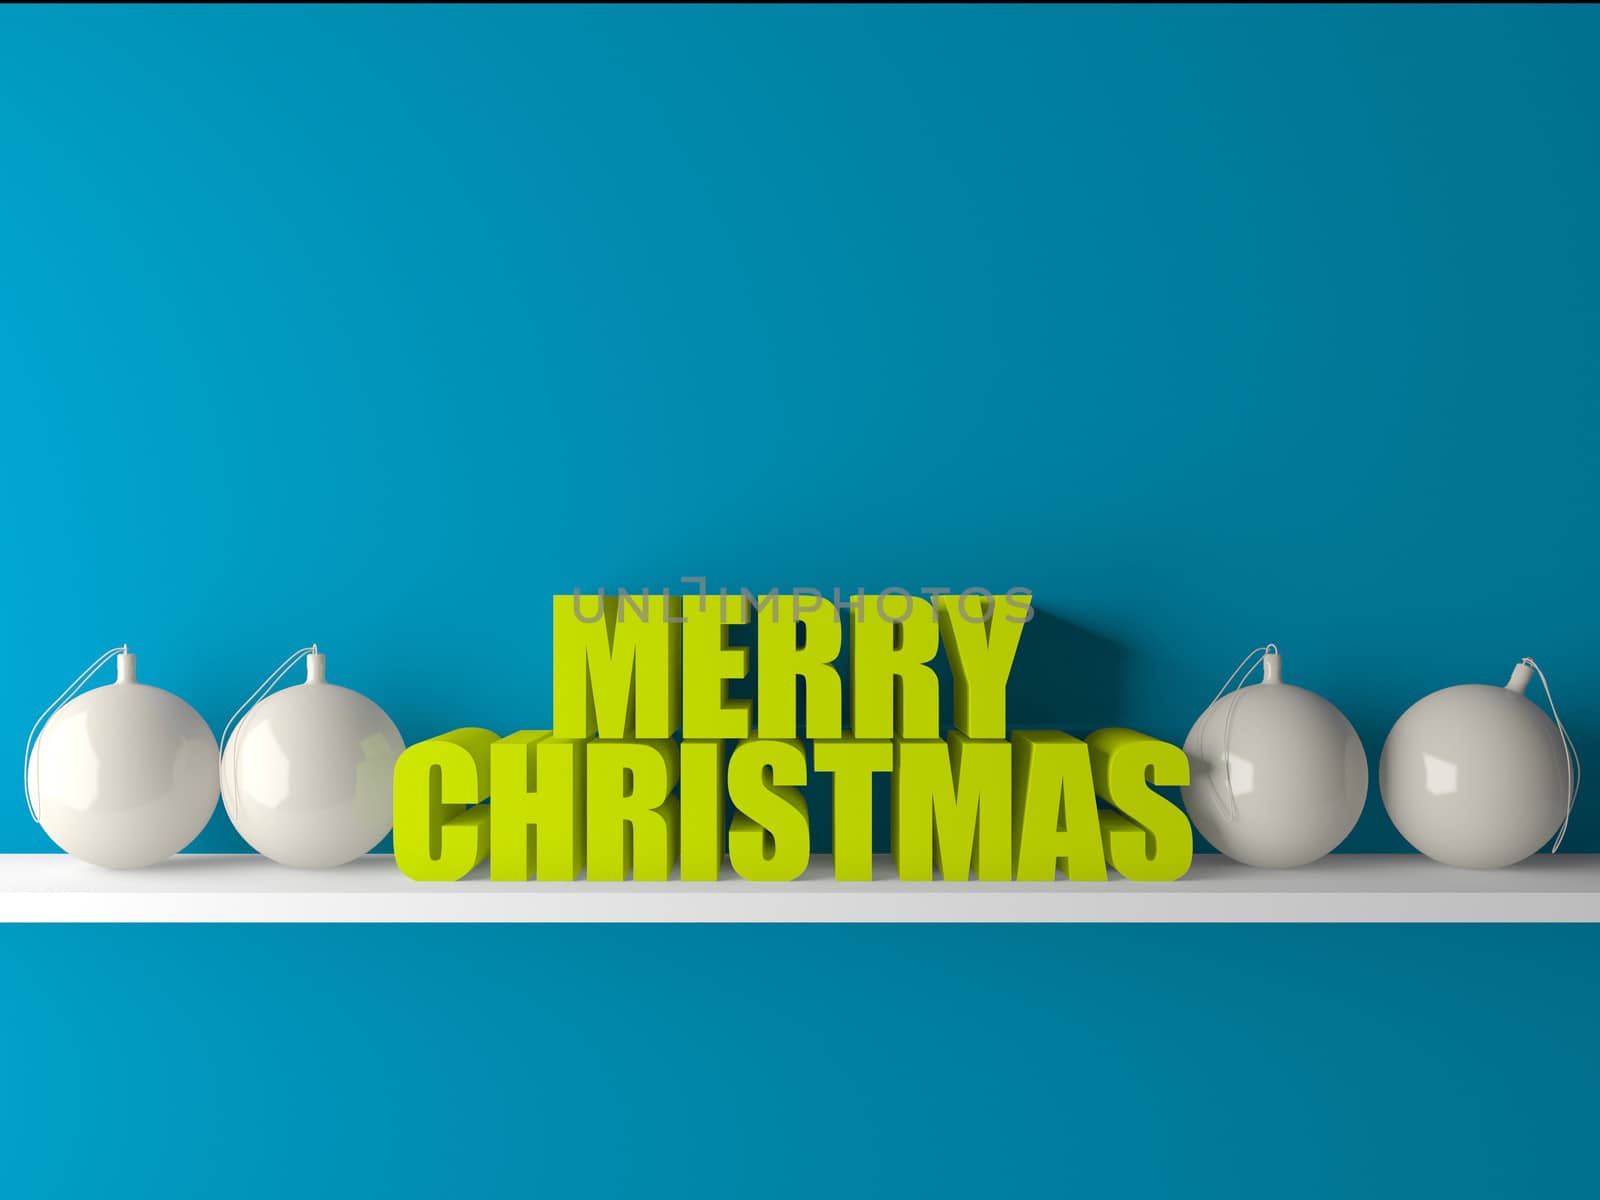 3d merry christmas text on wooden base with decorated balls